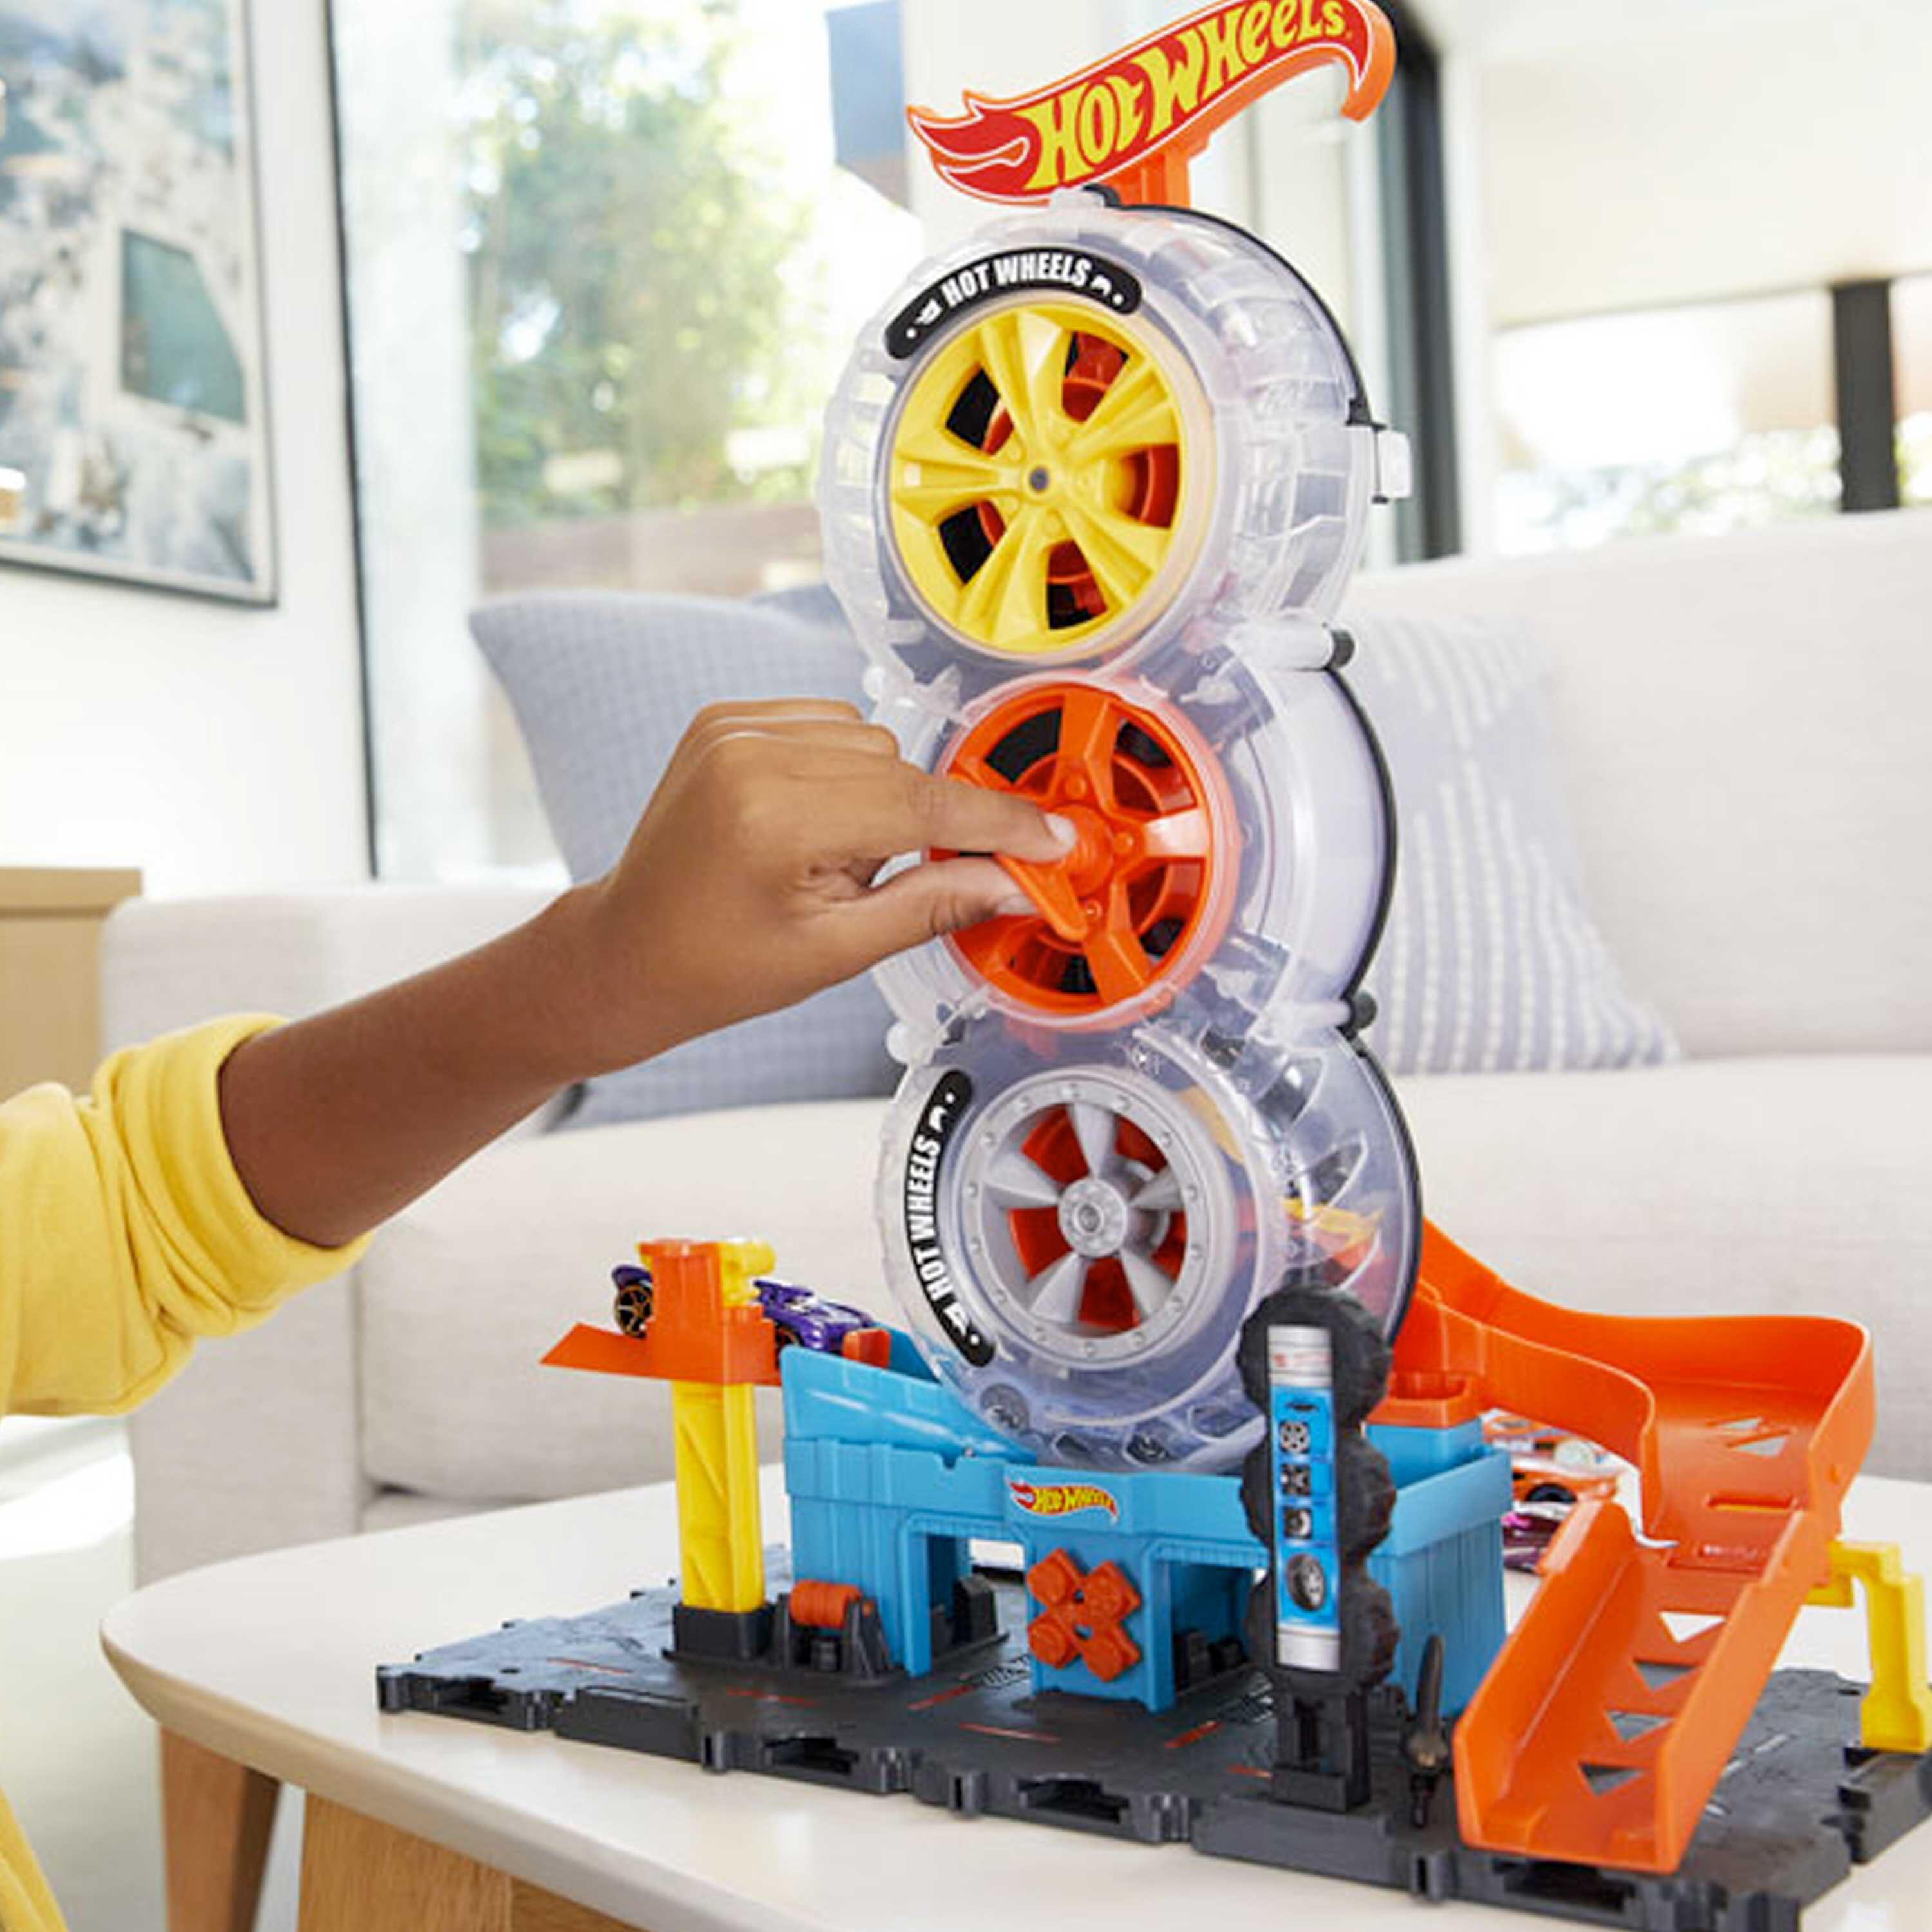 Hot Wheels Arena Smashers 5-Alarm Fire Crash Challenge Playset, 5-Alarm Toy  Truck in 1:64 Scale & Crushable Car